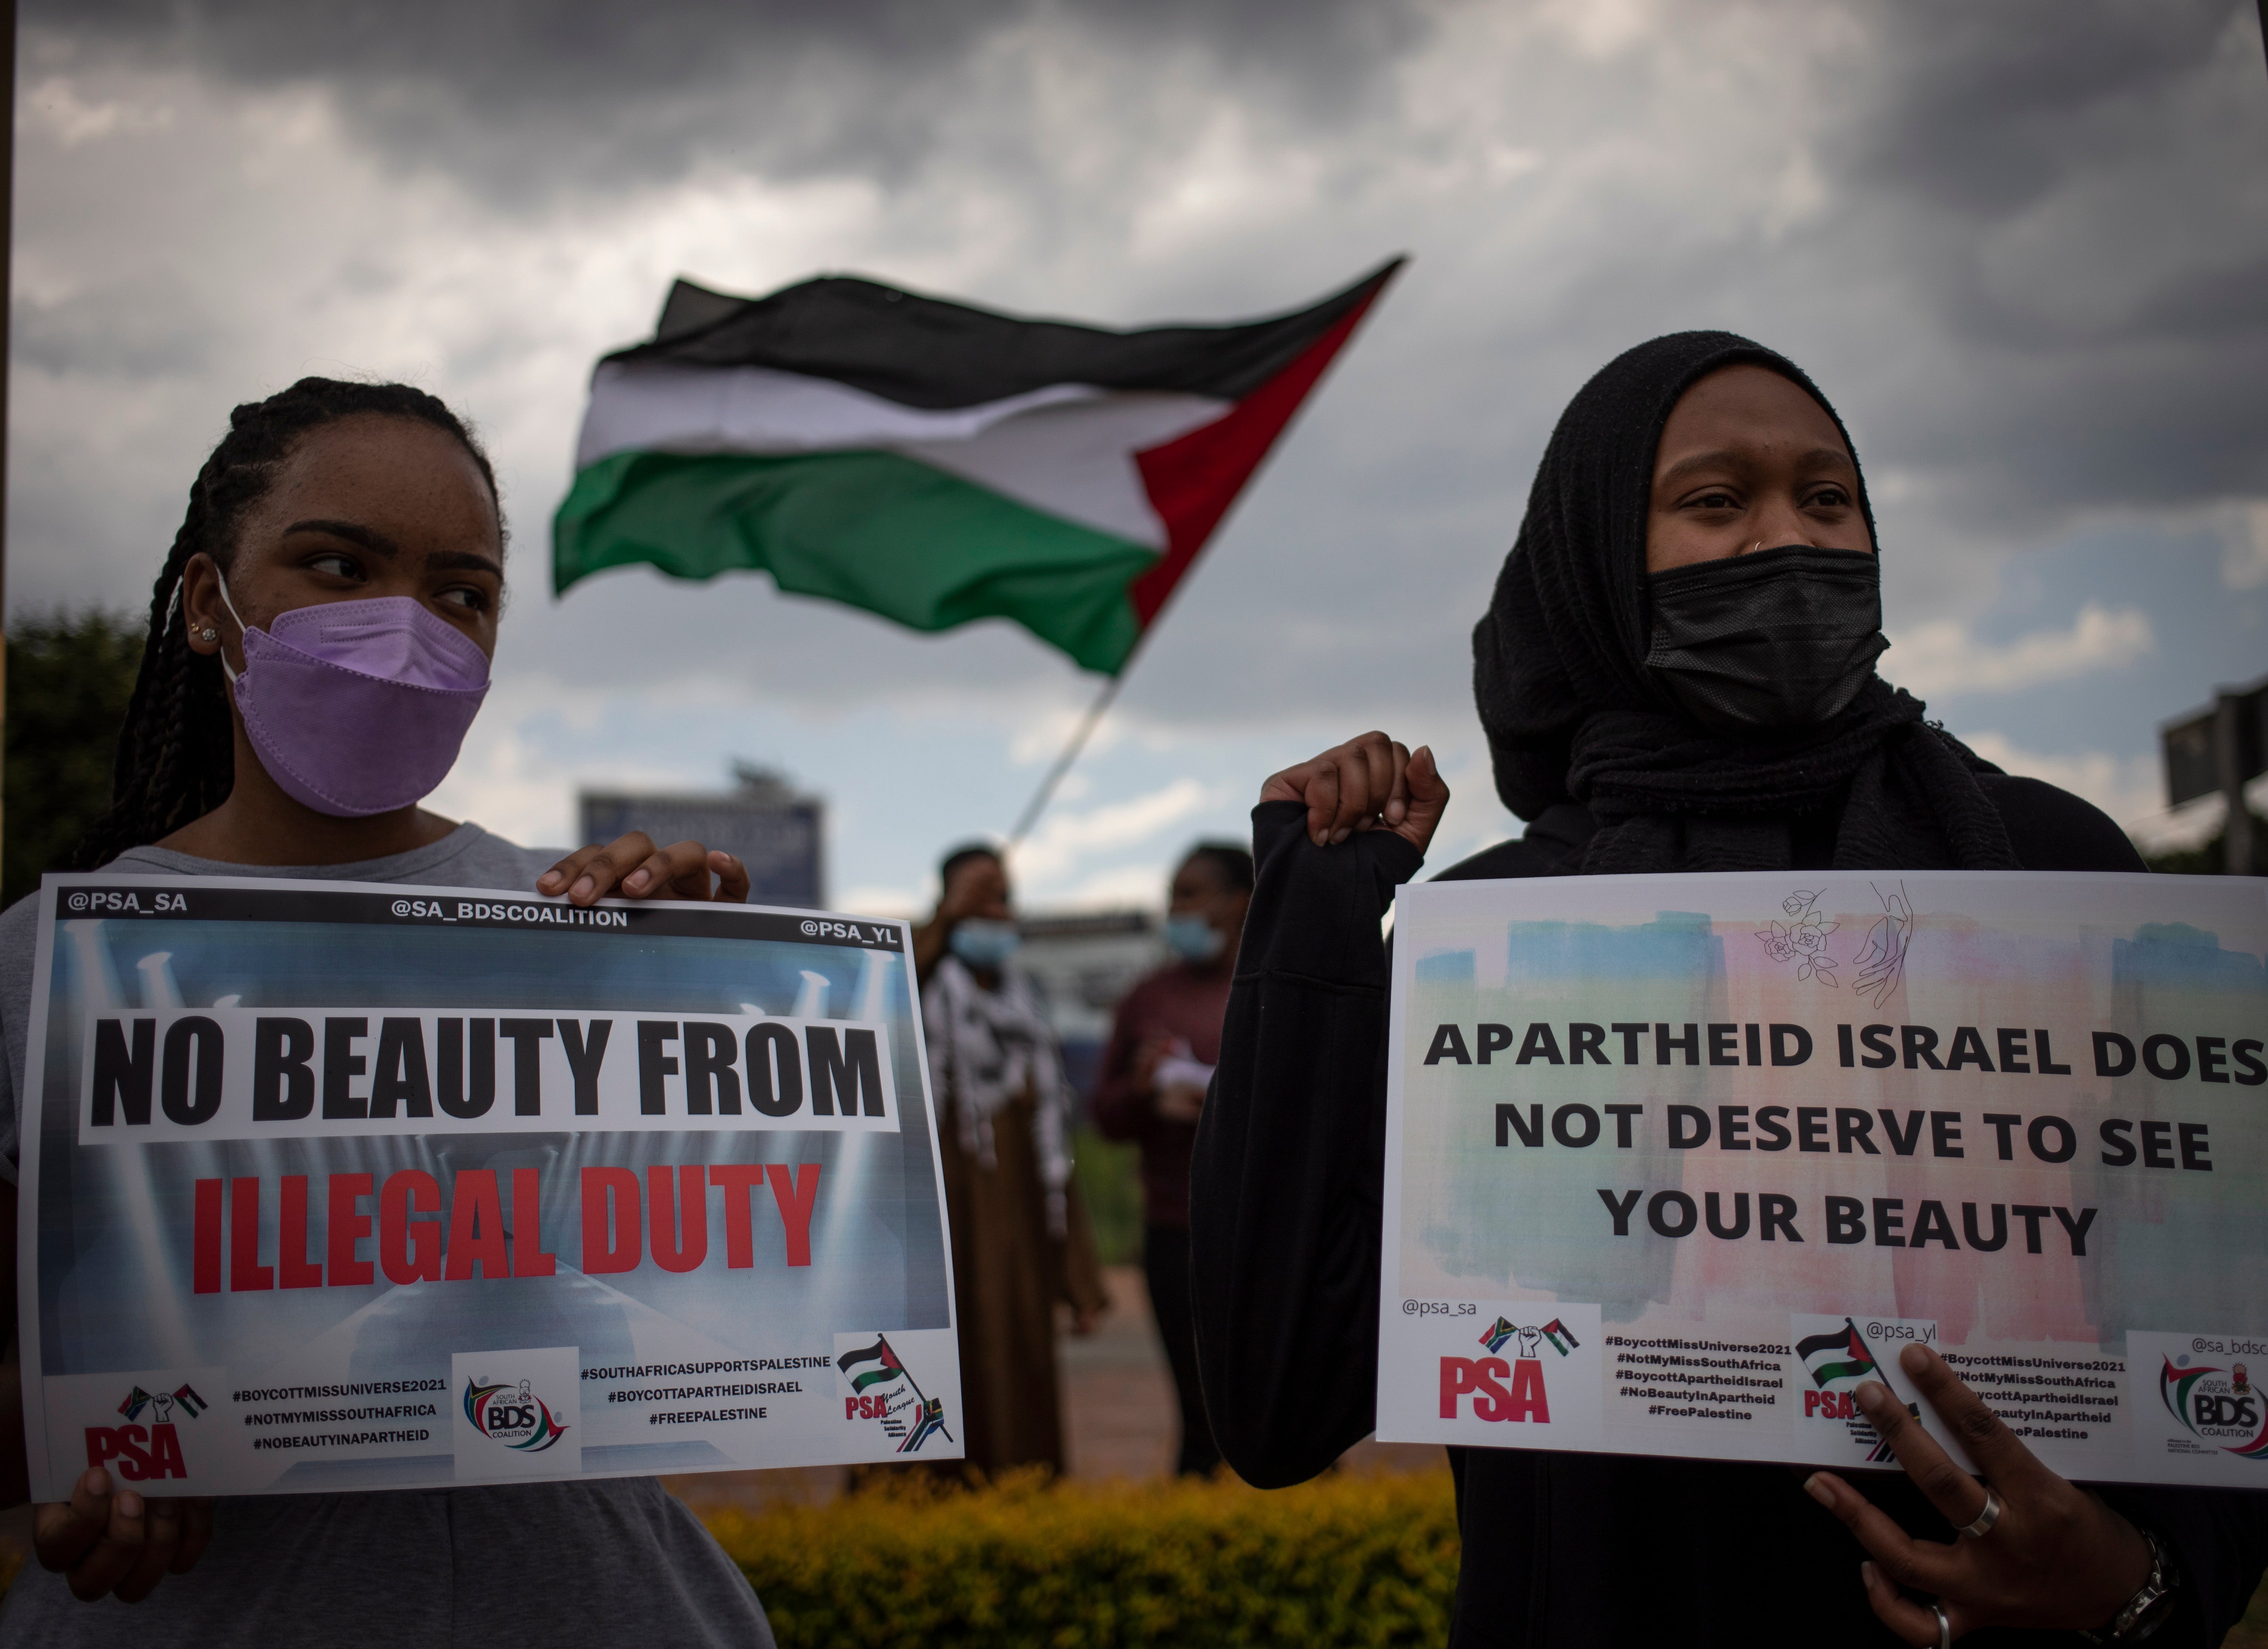 Pro-Palestine supporters protest outside the offices of Miss South Africa, Johannesburg, South Africa